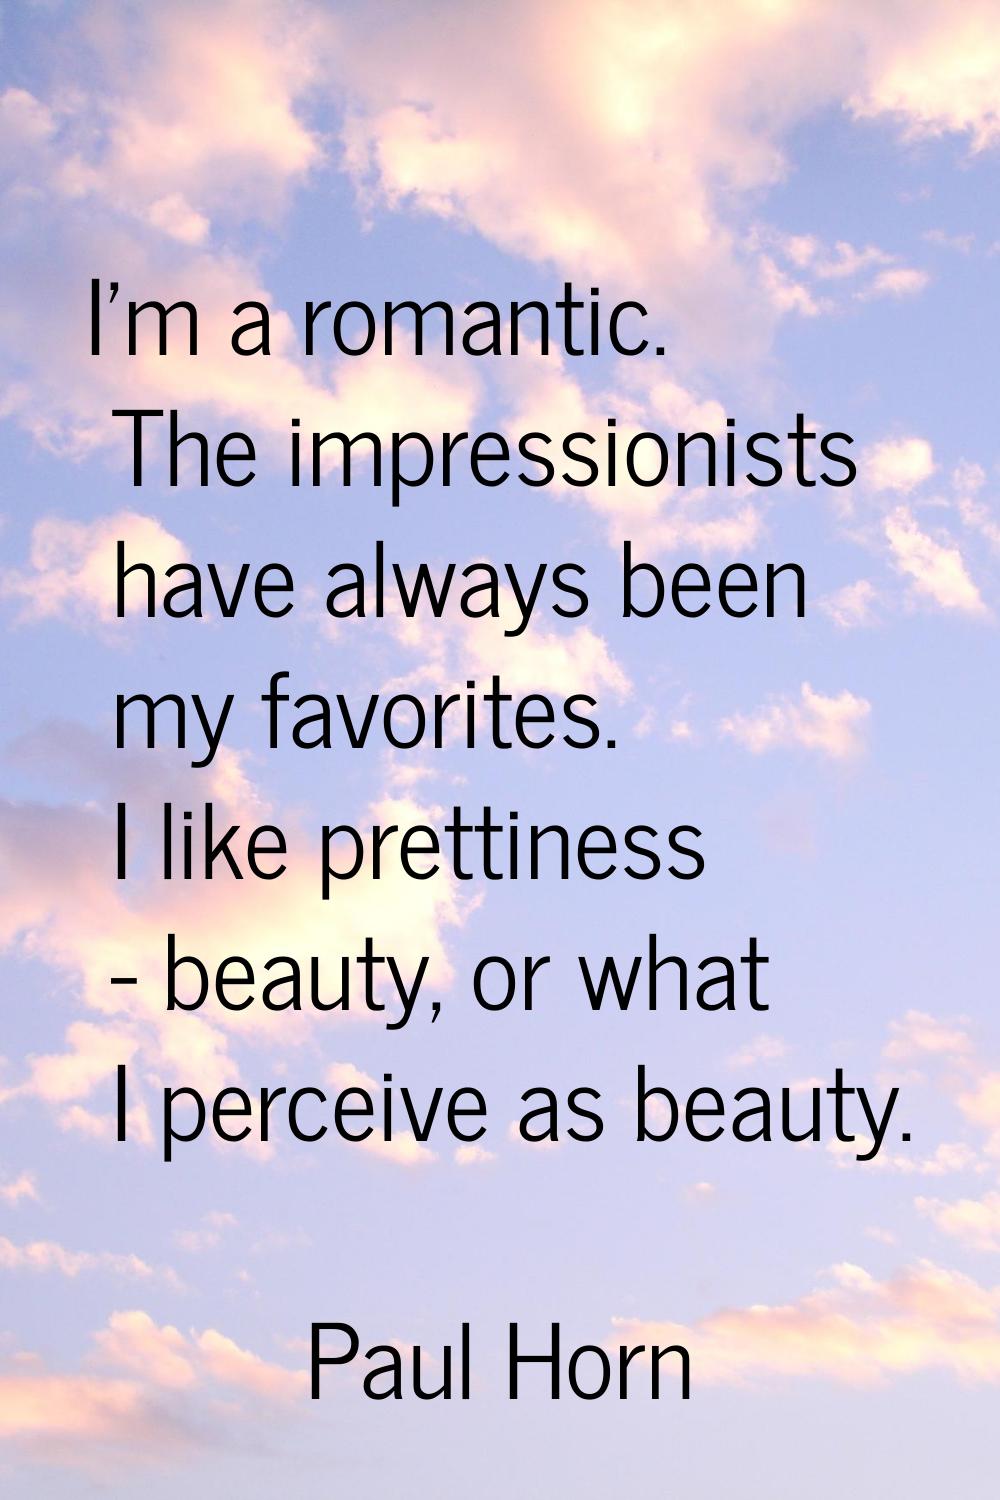 I'm a romantic. The impressionists have always been my favorites. I like prettiness - beauty, or wh